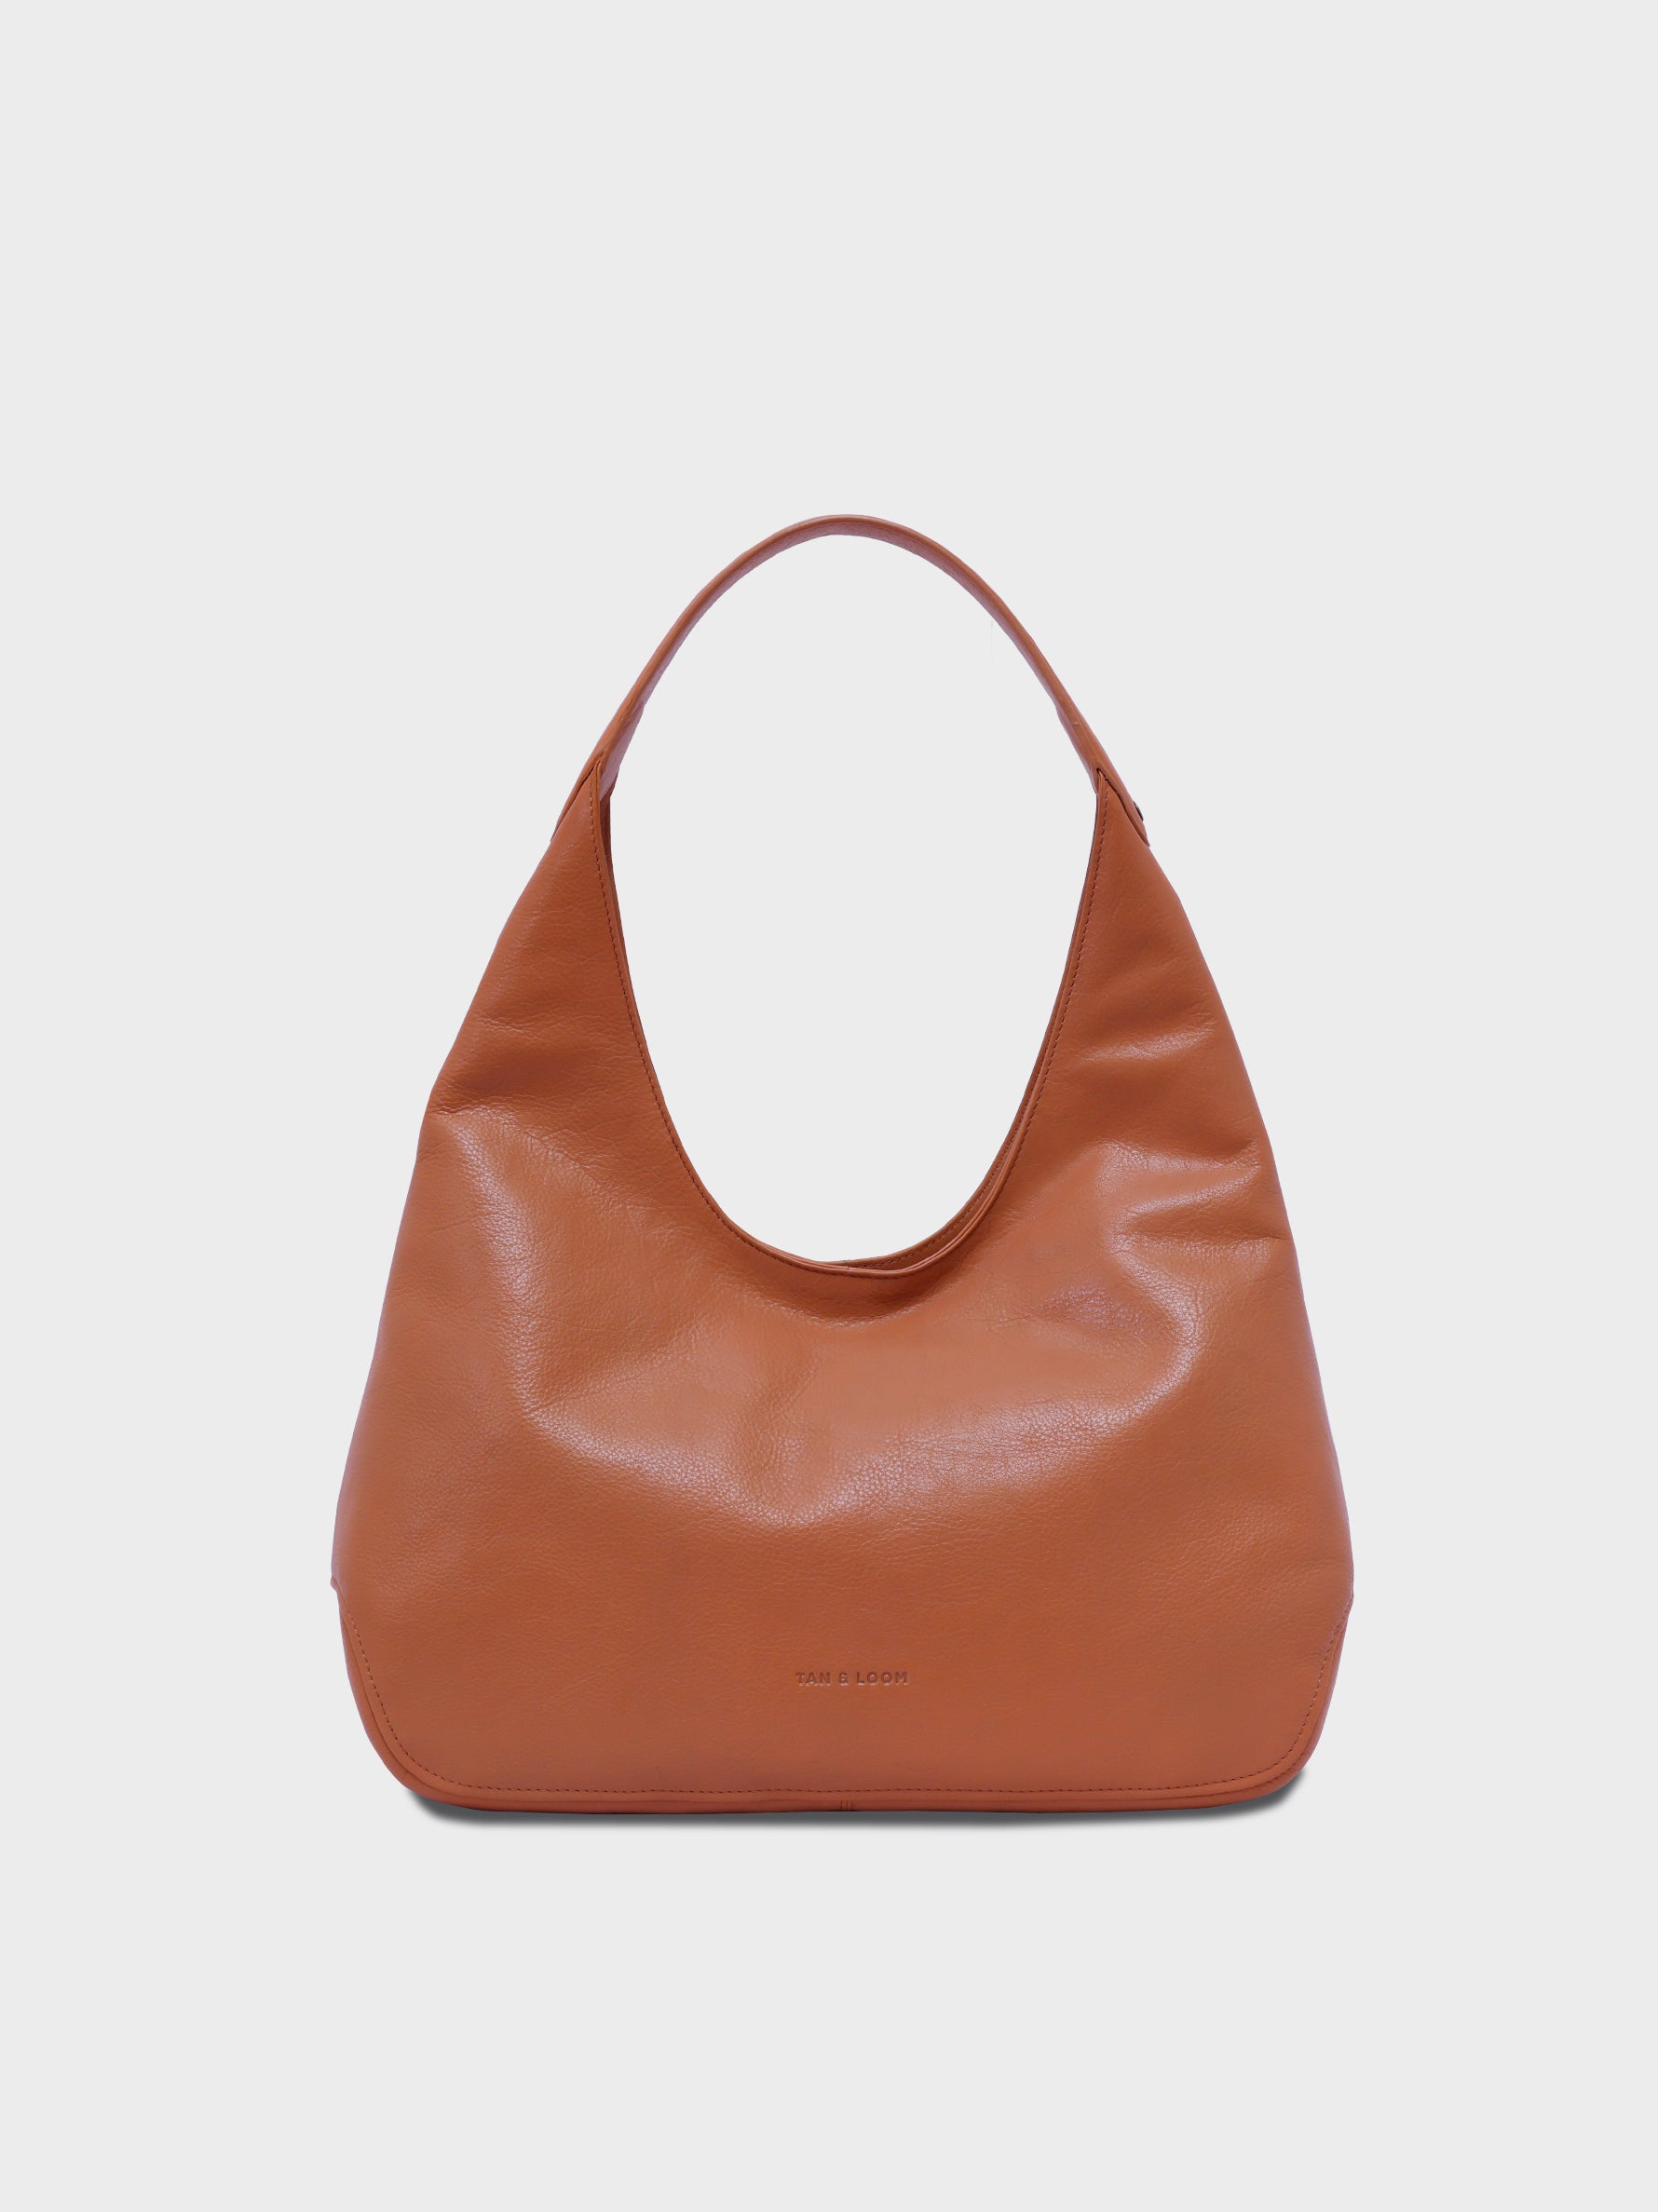 Handcrafted Genuine Vegetable Tanned Leather Hippie's Hobo Dusty Peach for Women Tan & Loom